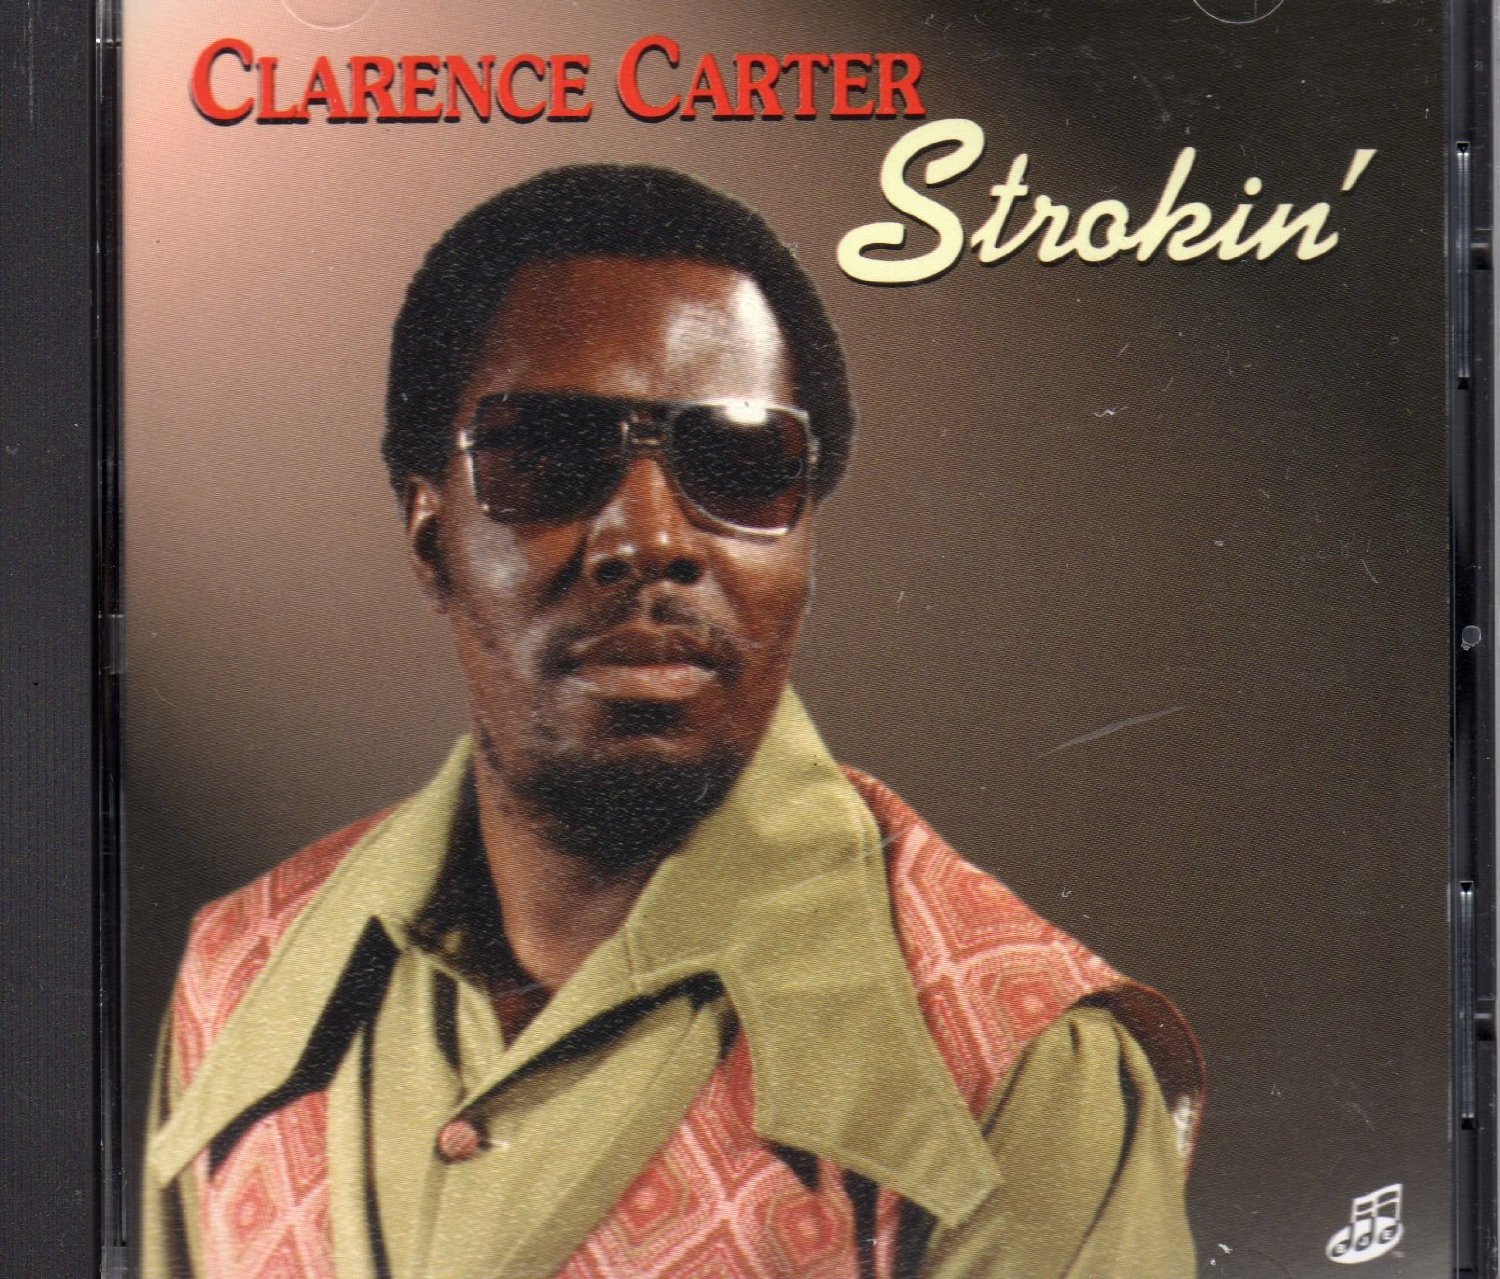 Things You Should Know About: Clarence Carter's 